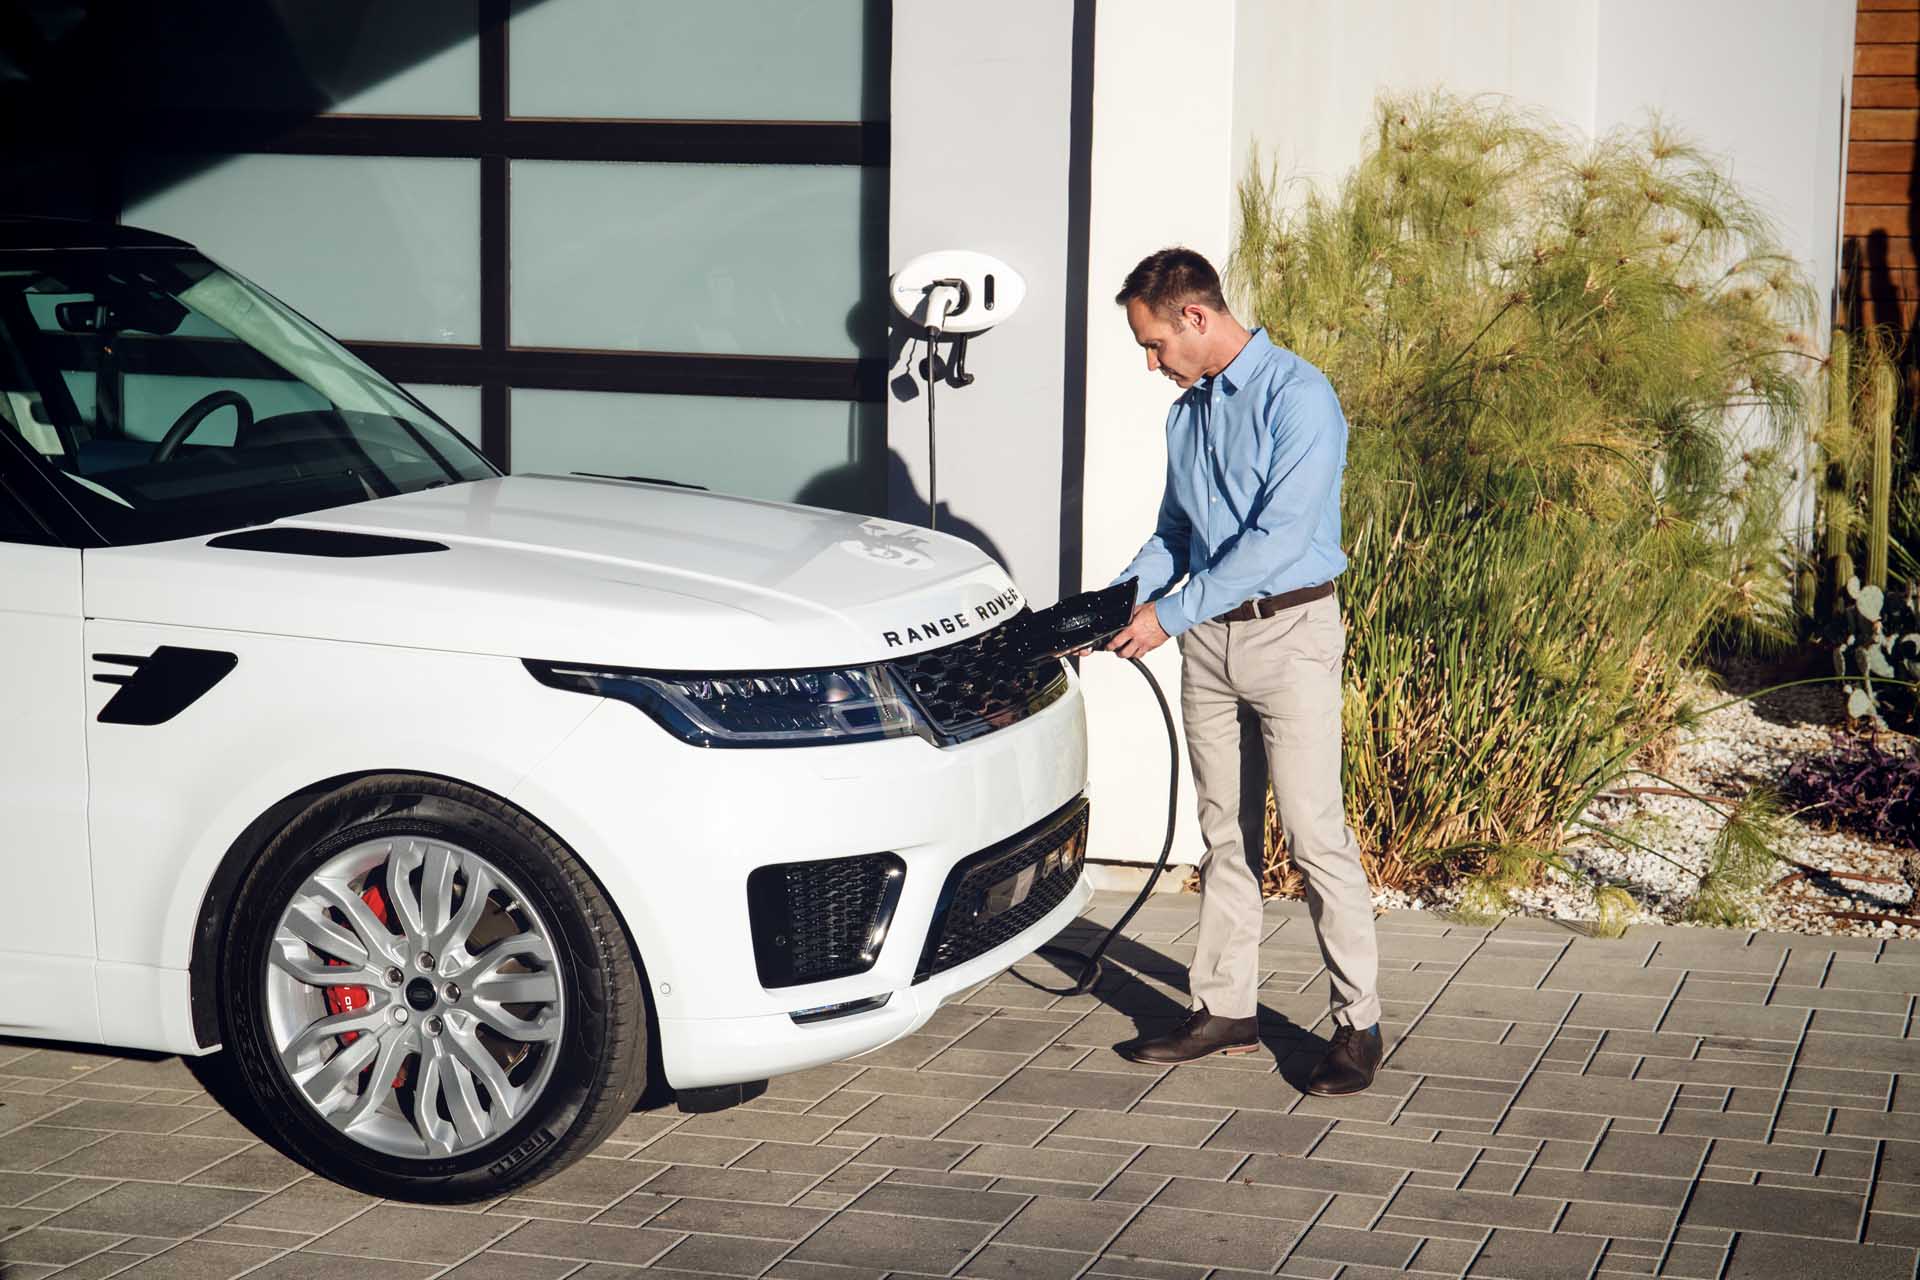 land rover to launch 6 electric vehicles by 2026